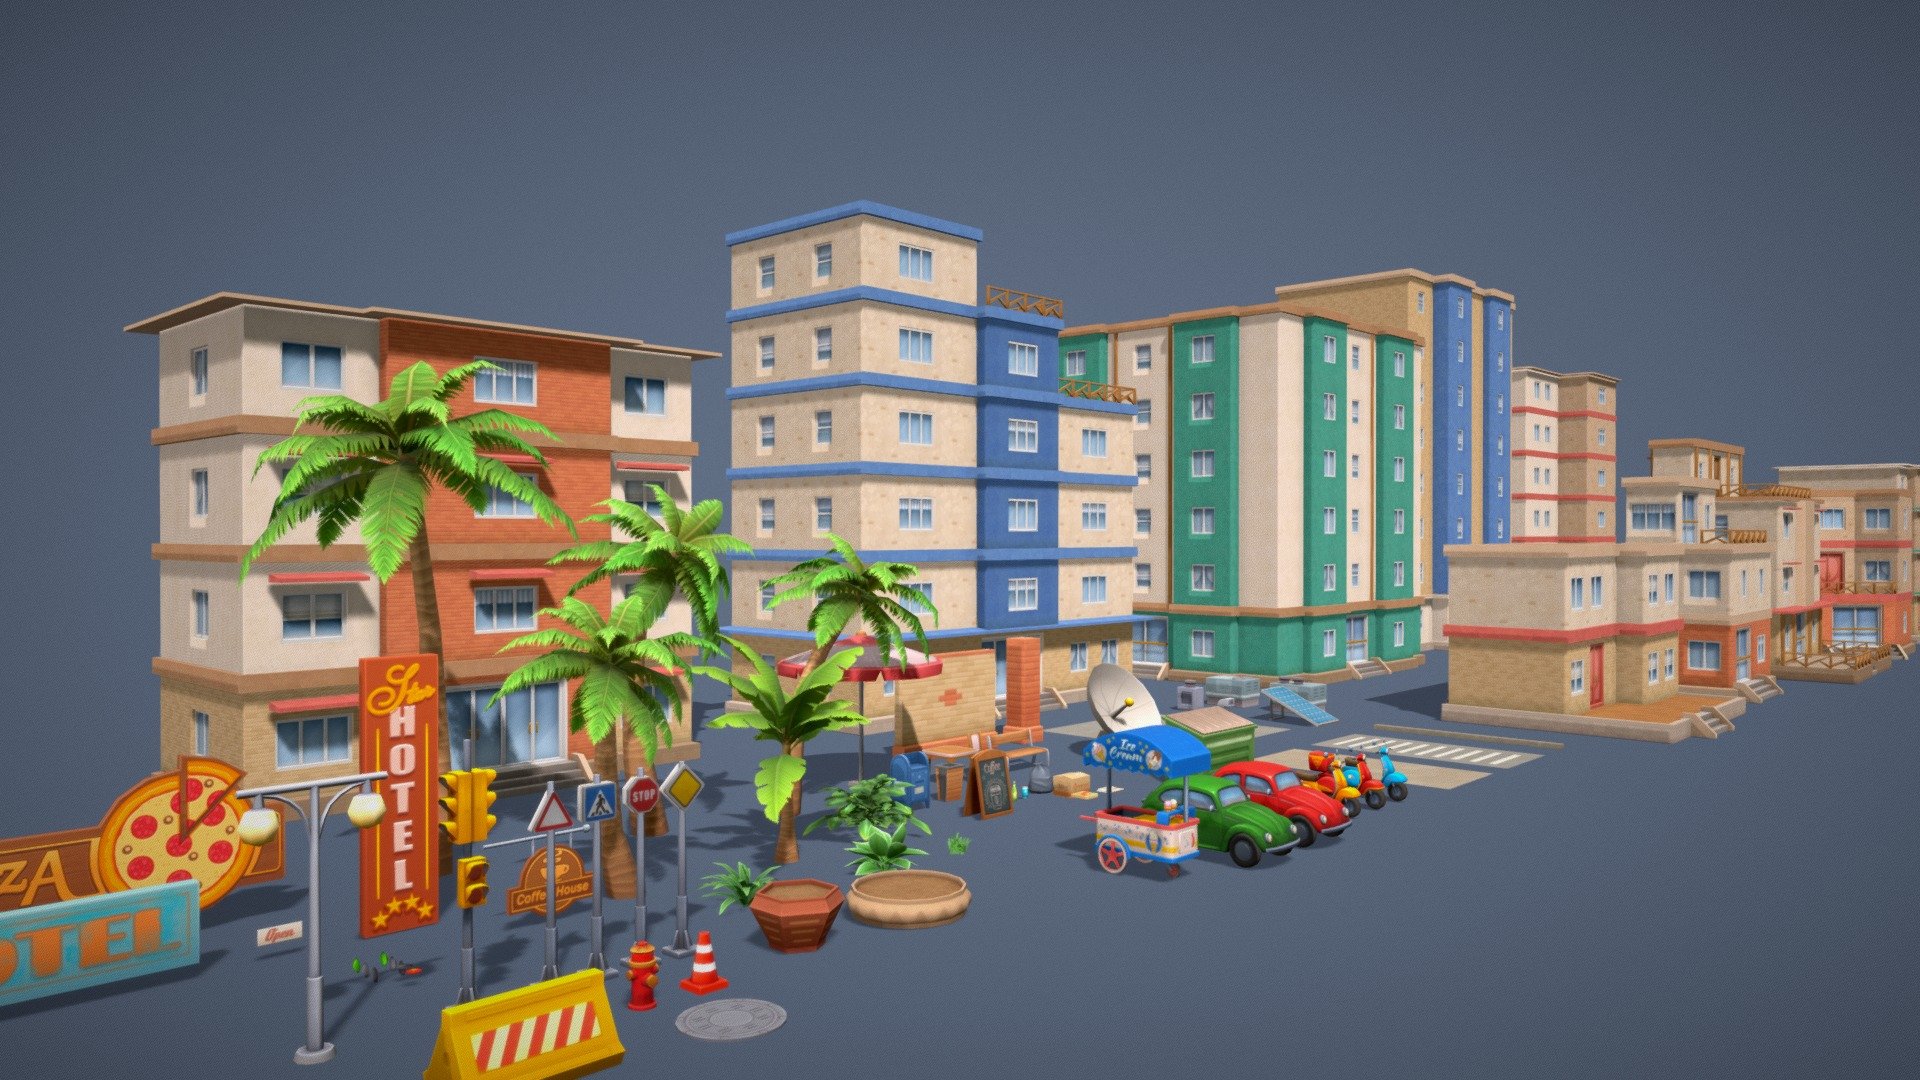 Here you can see all parts of the Resort town set.

Watch the video with the example scene 3d model